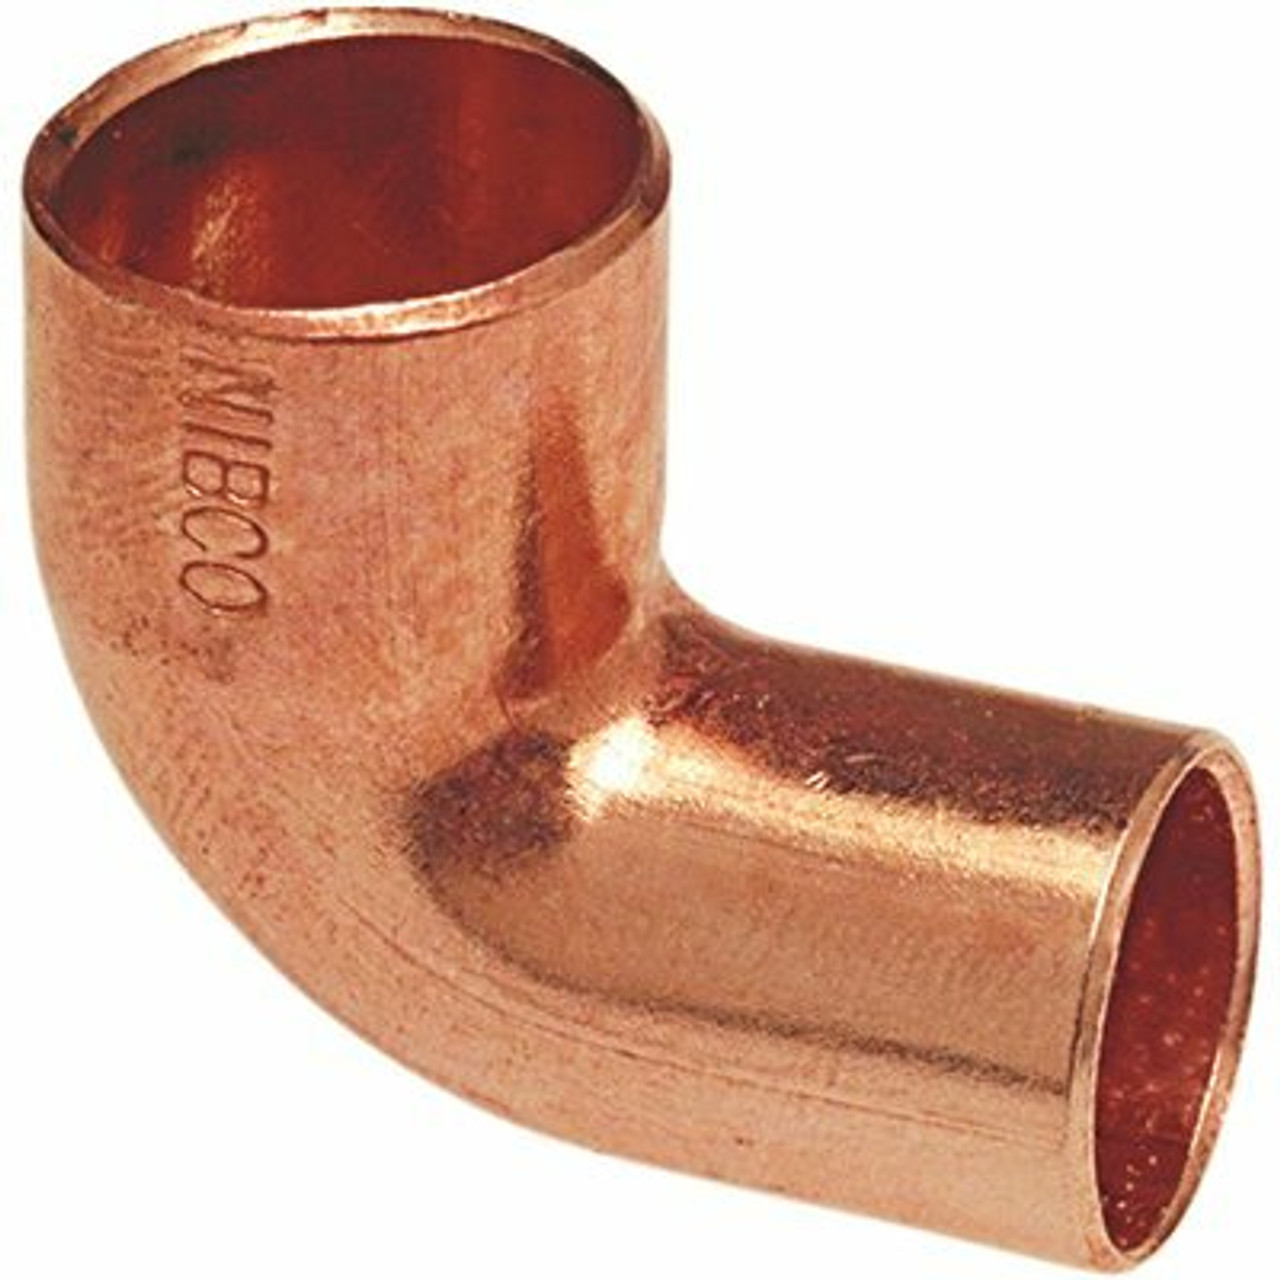 Nibco 1/2 In. Wrot Copper 90-Degree Ftg X C Fitting Elbow (50-Pack)